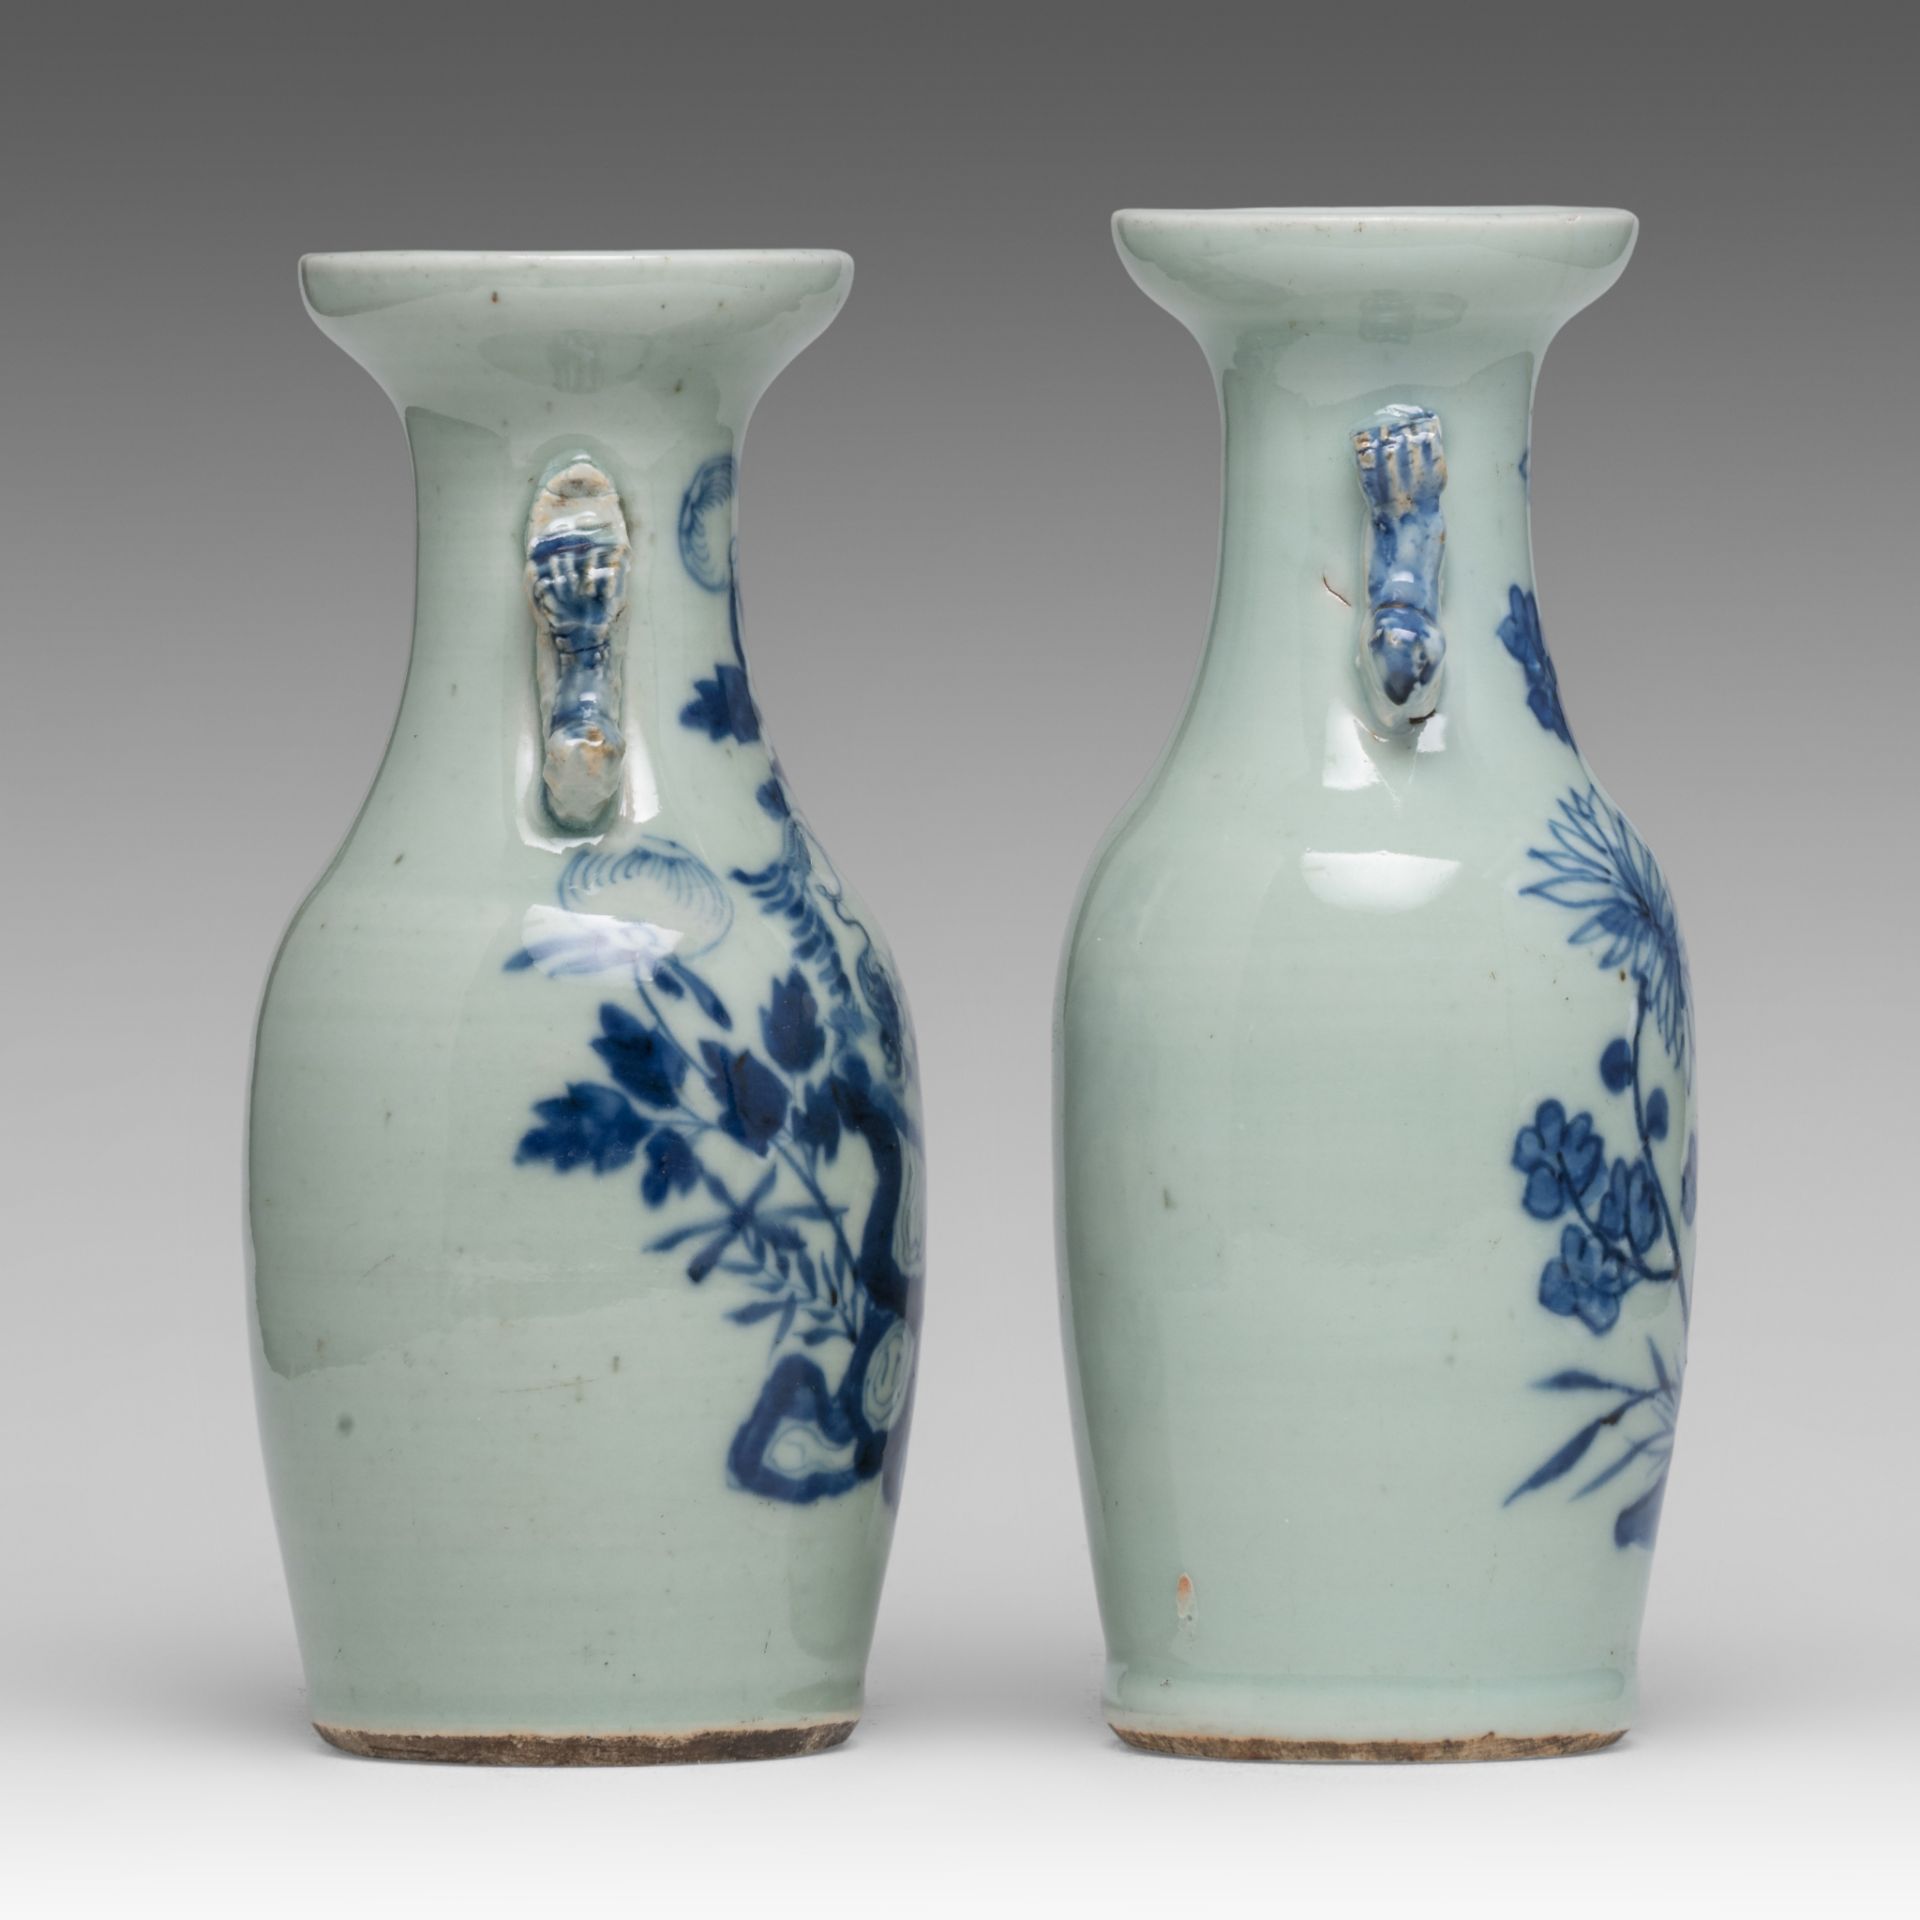 A collection of Chinese blue and white bowls and a pair of celadon vases, late 19thC/Republic period - Image 11 of 19